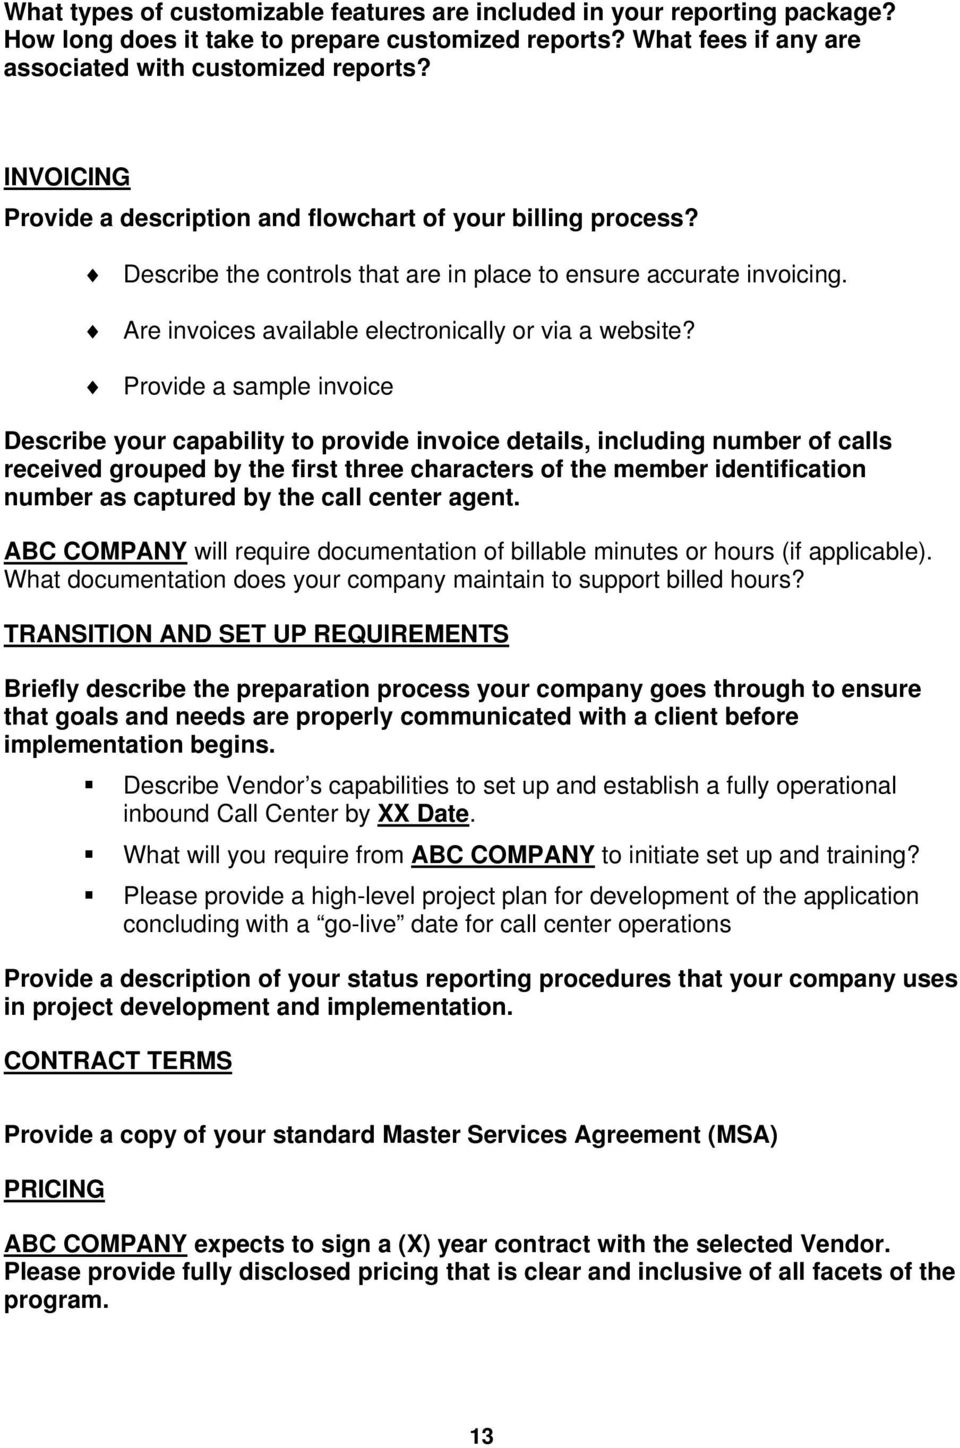 Client Service Agreement Template ] – Doc 407527 Basic Inside Master Services Agreement Template